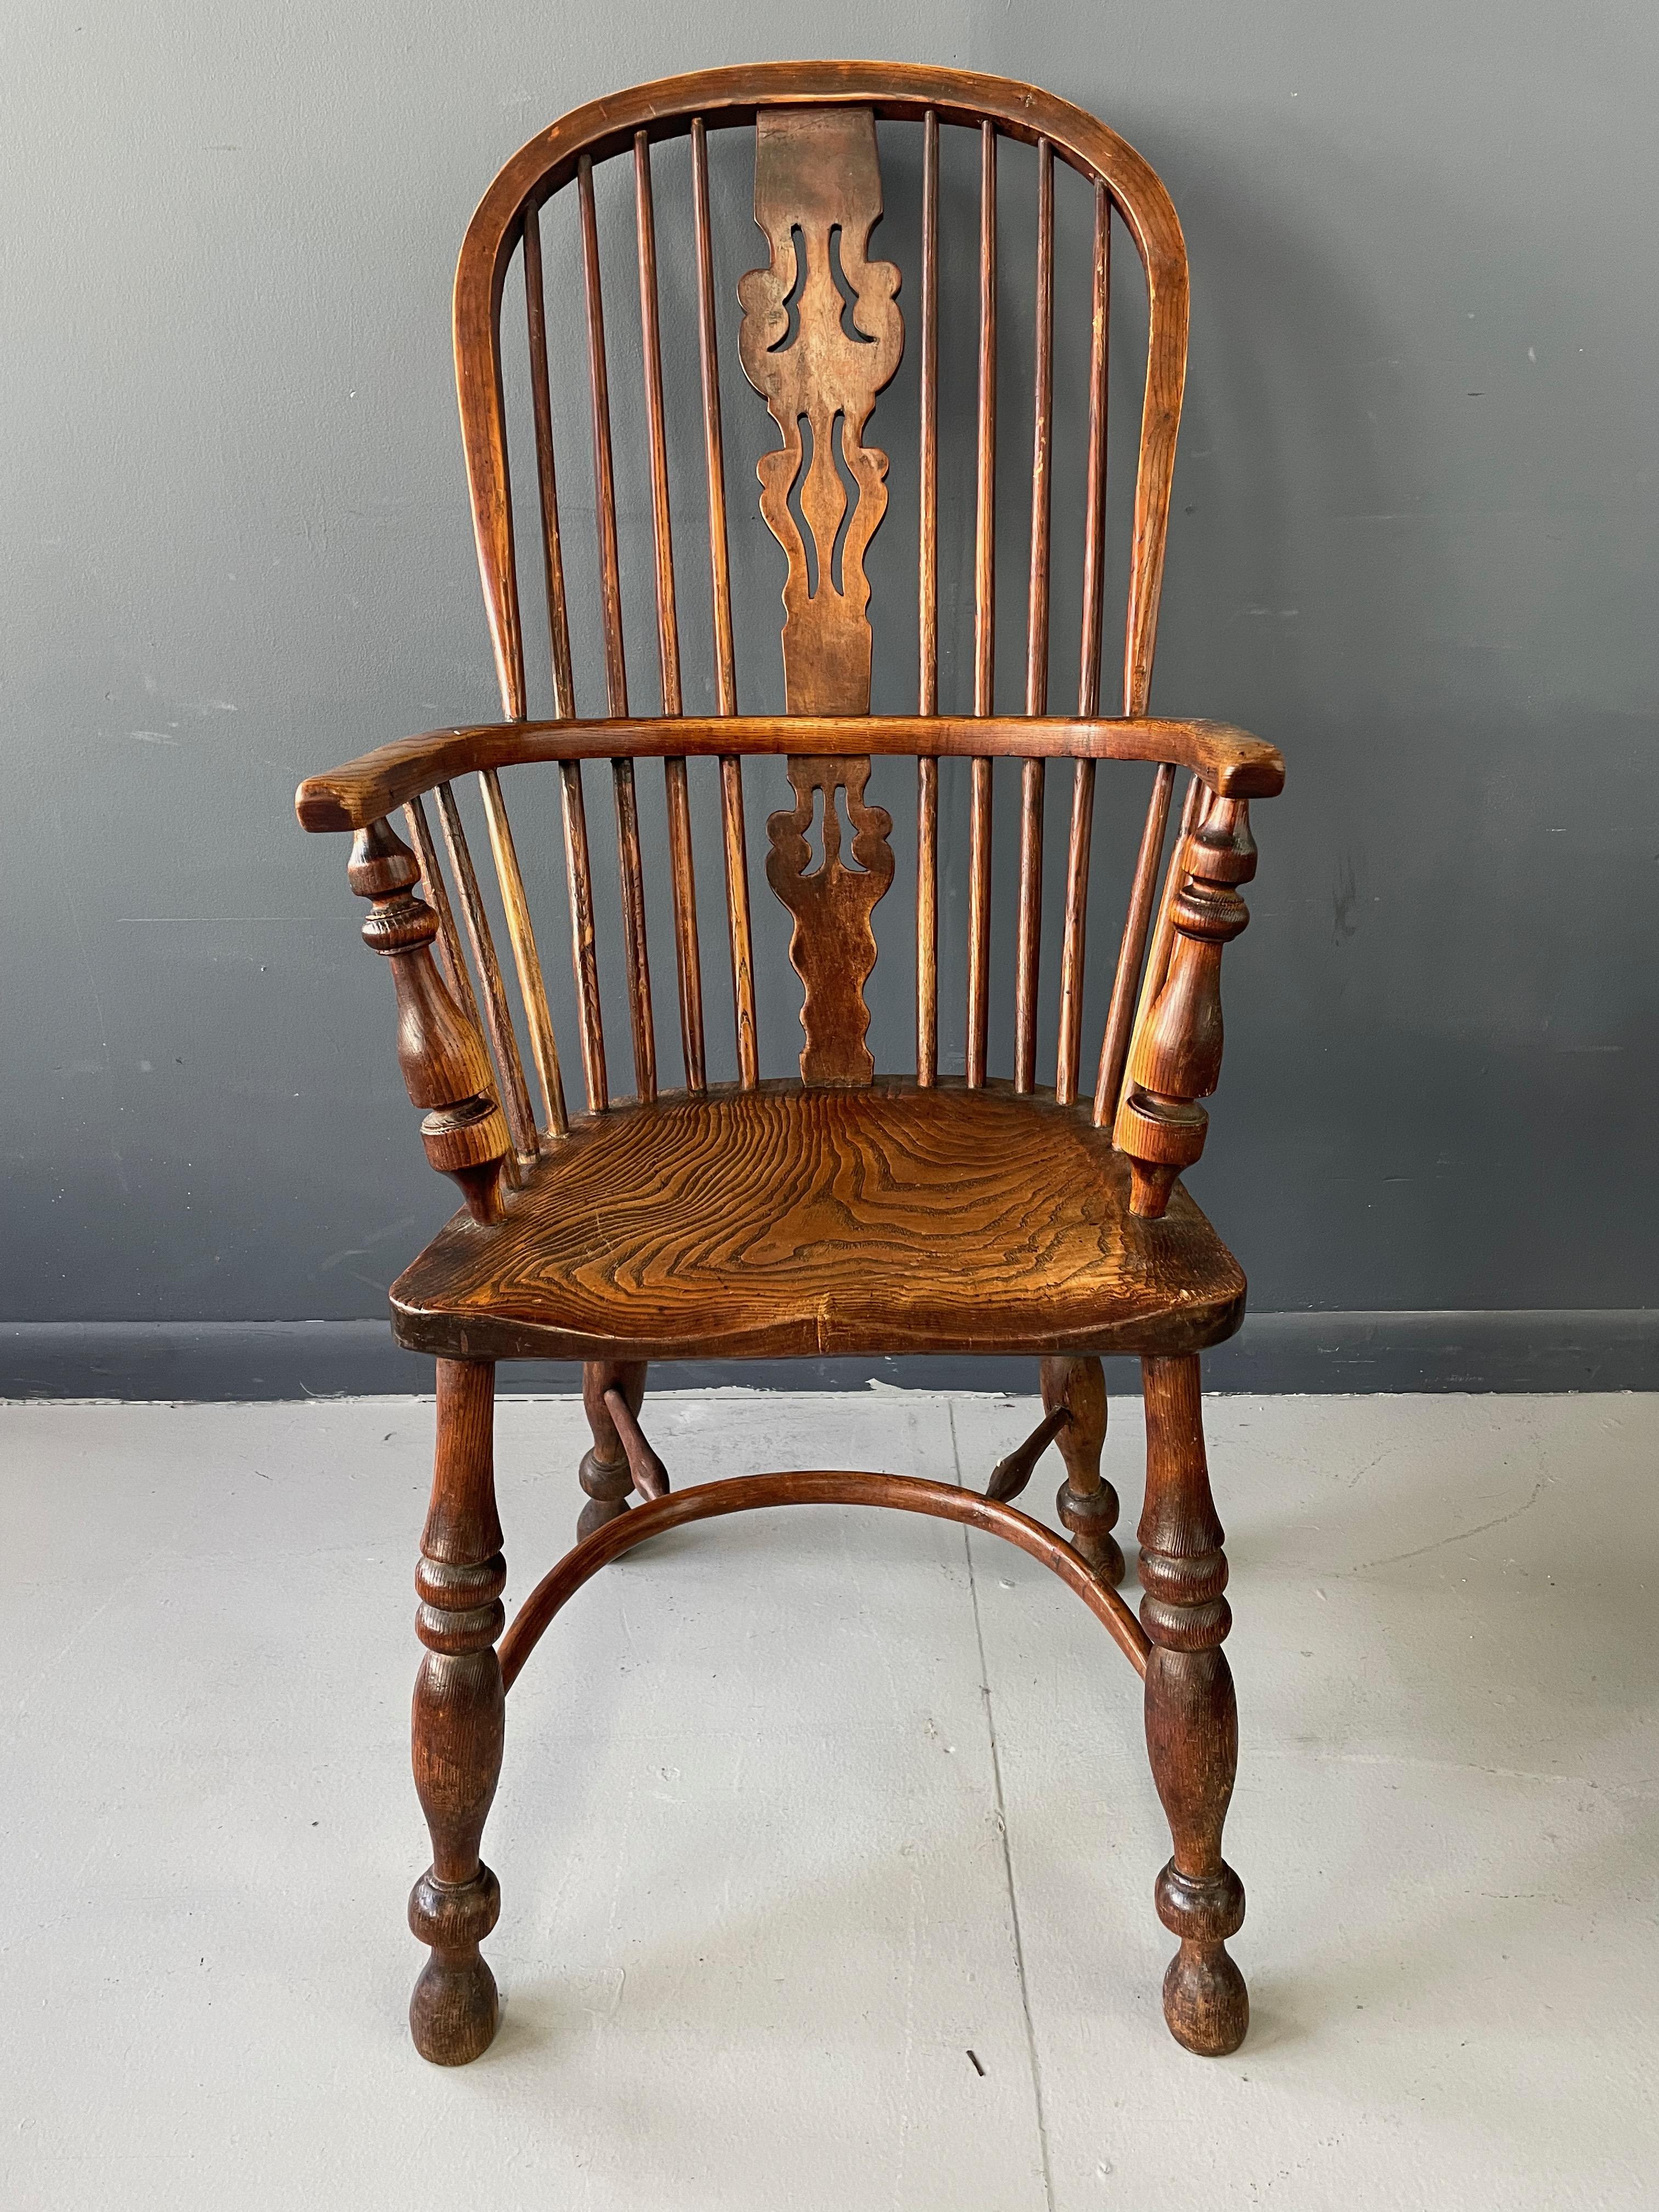 This is an antique Windsor elbow chair, a Victorian, double hoop armchair in elm and ash and dating to circa the mid-19th century, circa 1850. Classic English, country, elbow chair Triple fret-cut back splat over key hole lower Raked, bentwood back